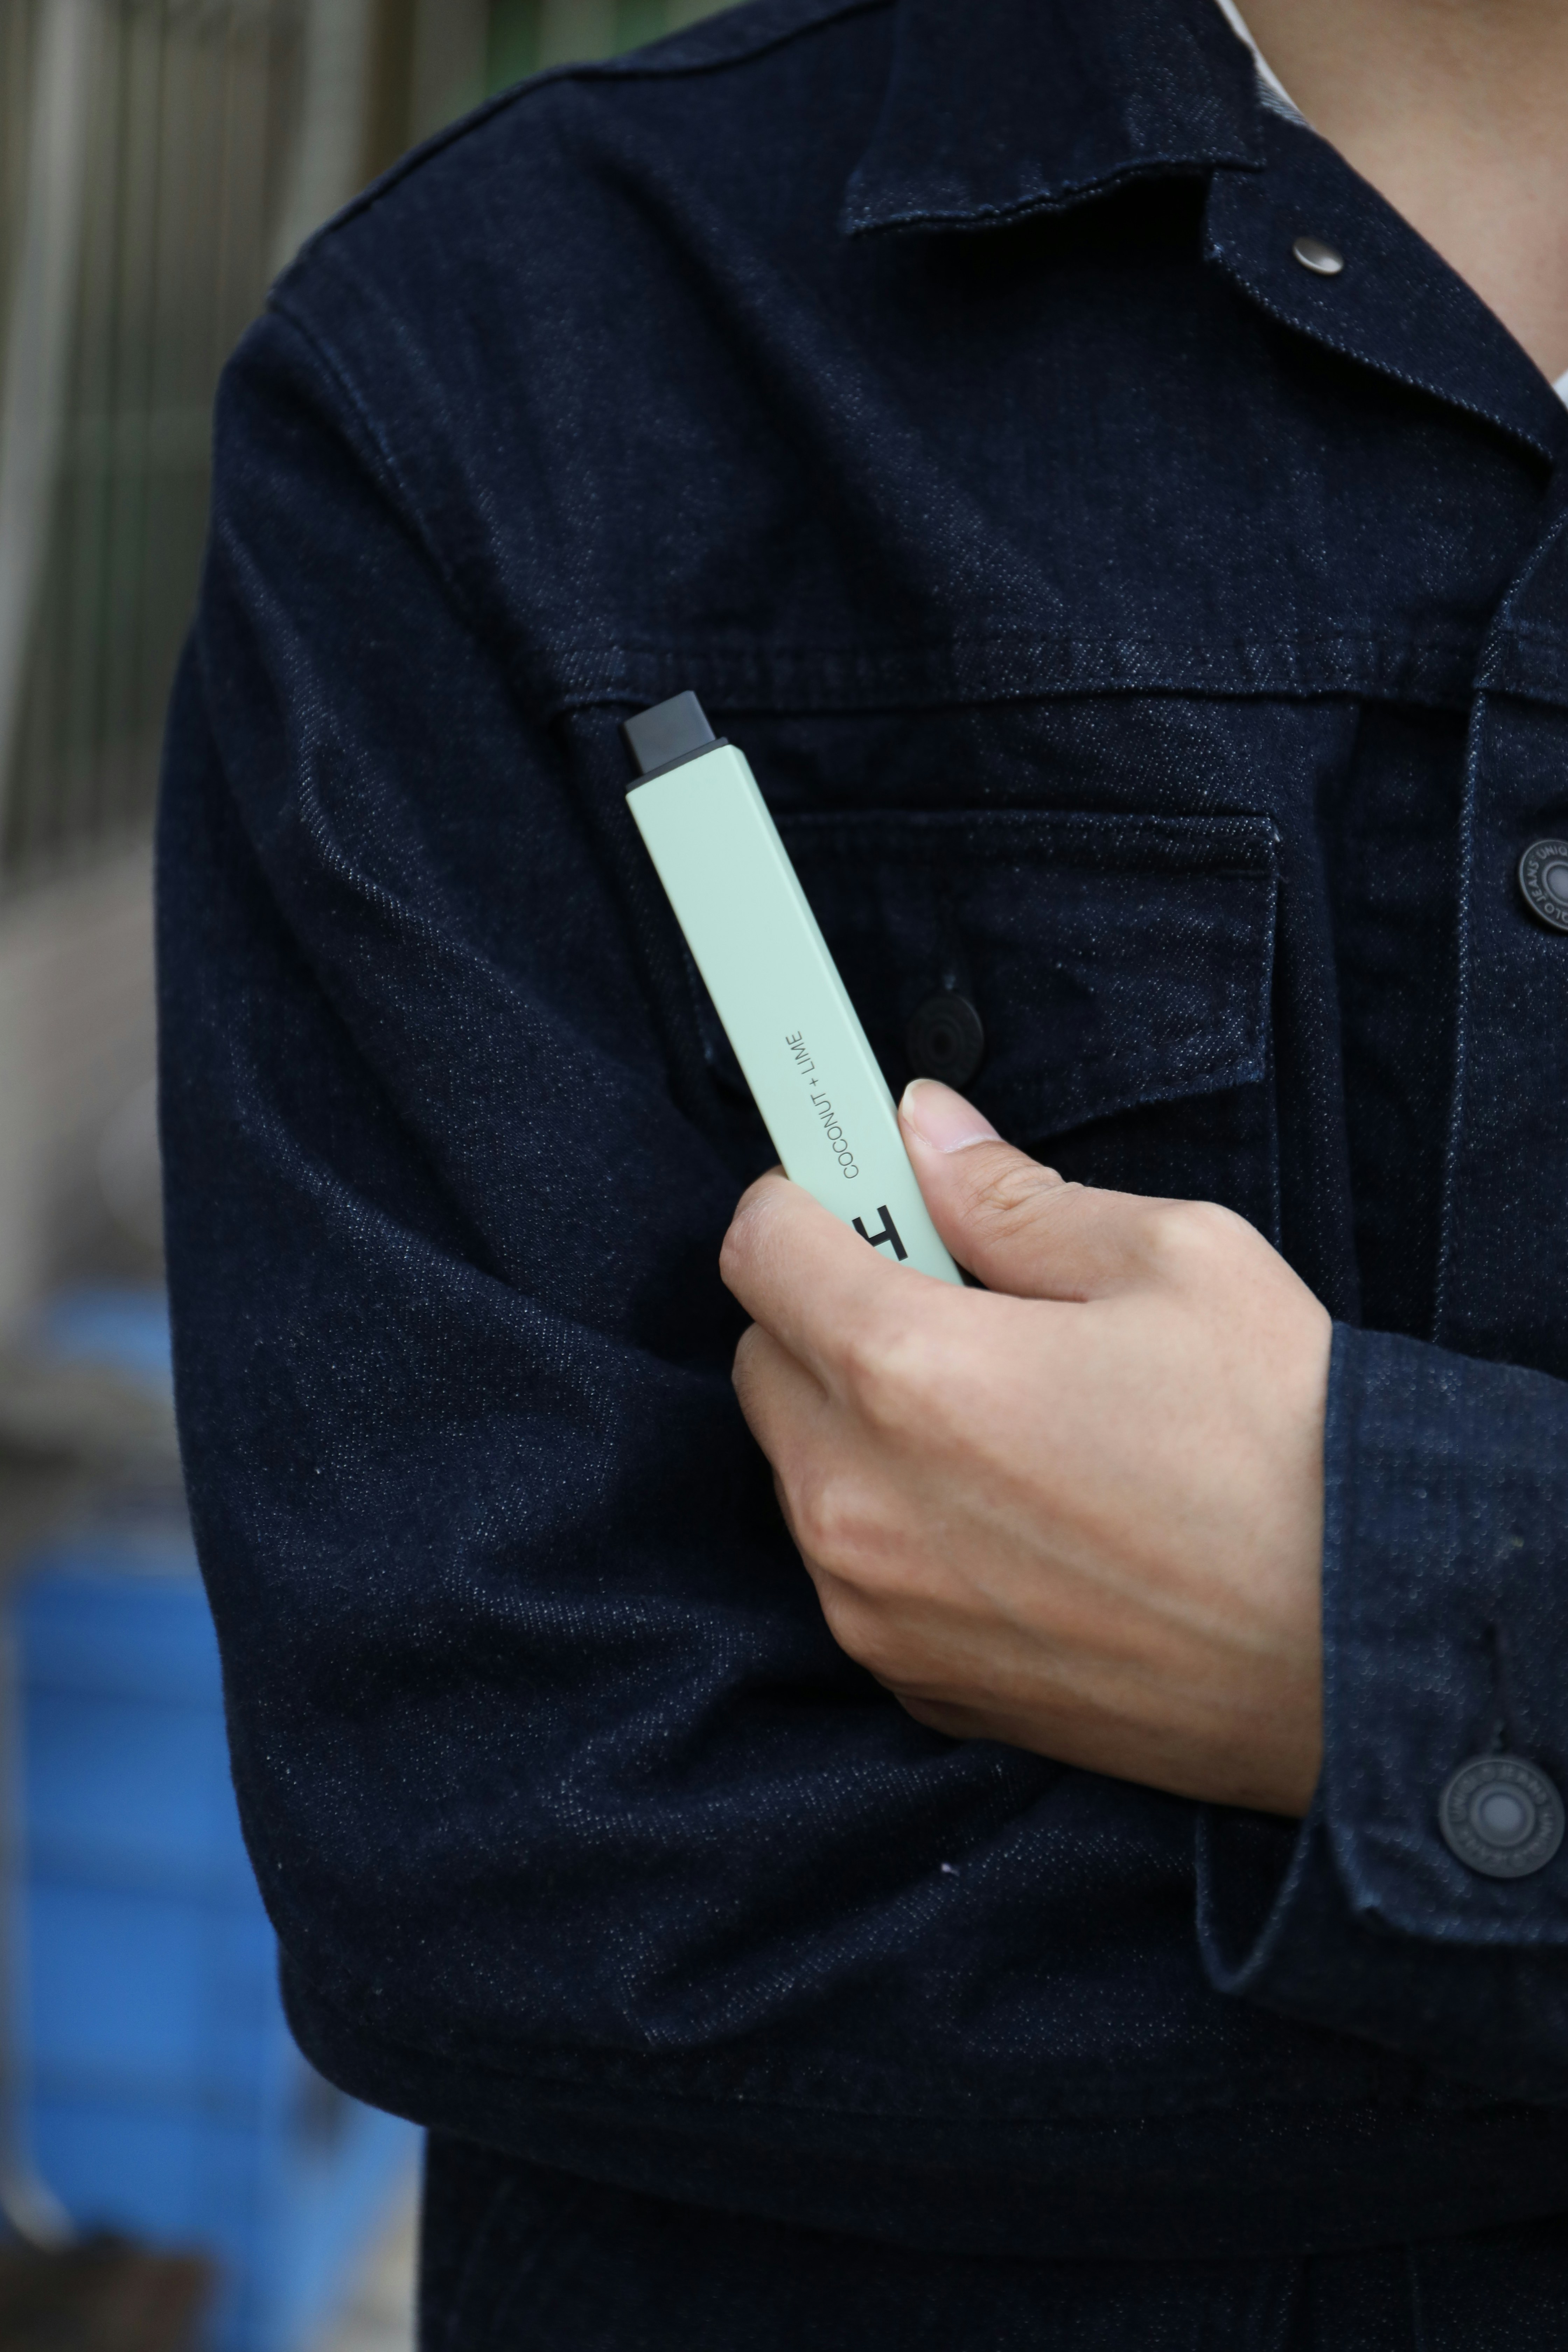 A mint green HYLA Peppermint nicotine-free guarana and l-dopa vape is held in the hand of a man wearing a denim shirt.